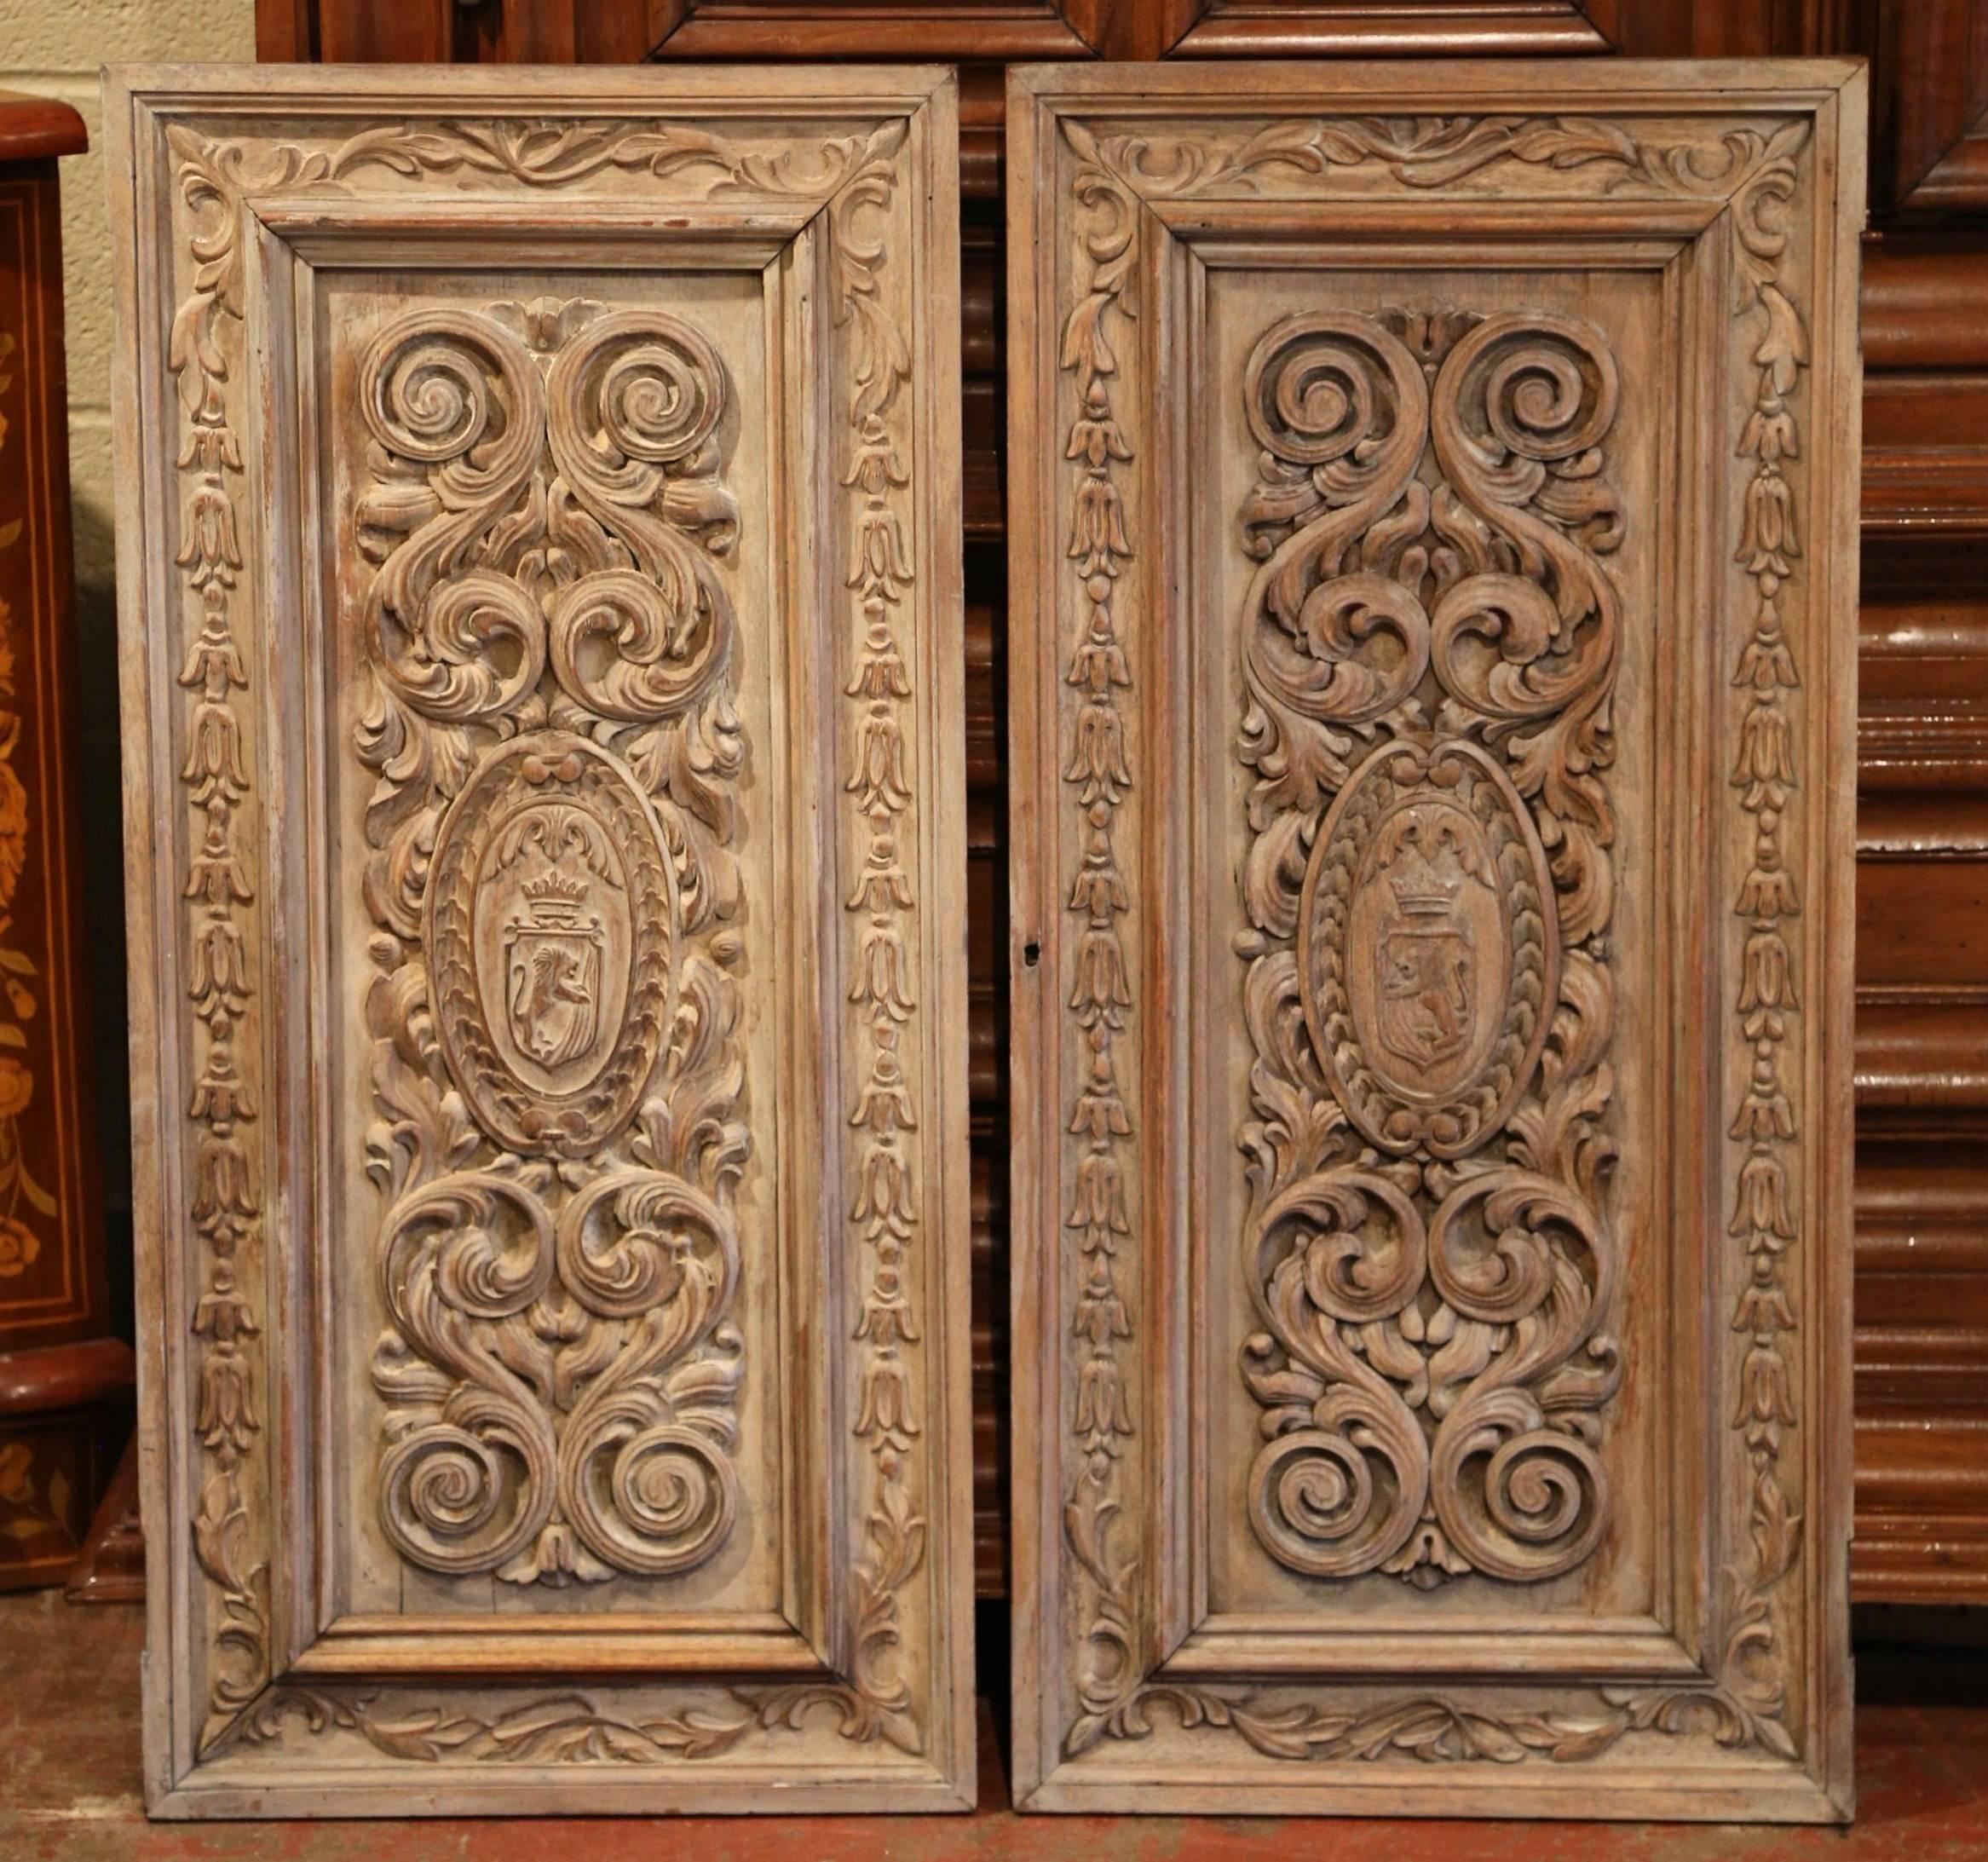 Patinated Pair of 19th Century French Hand-Carved Walnut Panel Doors with Family Crests